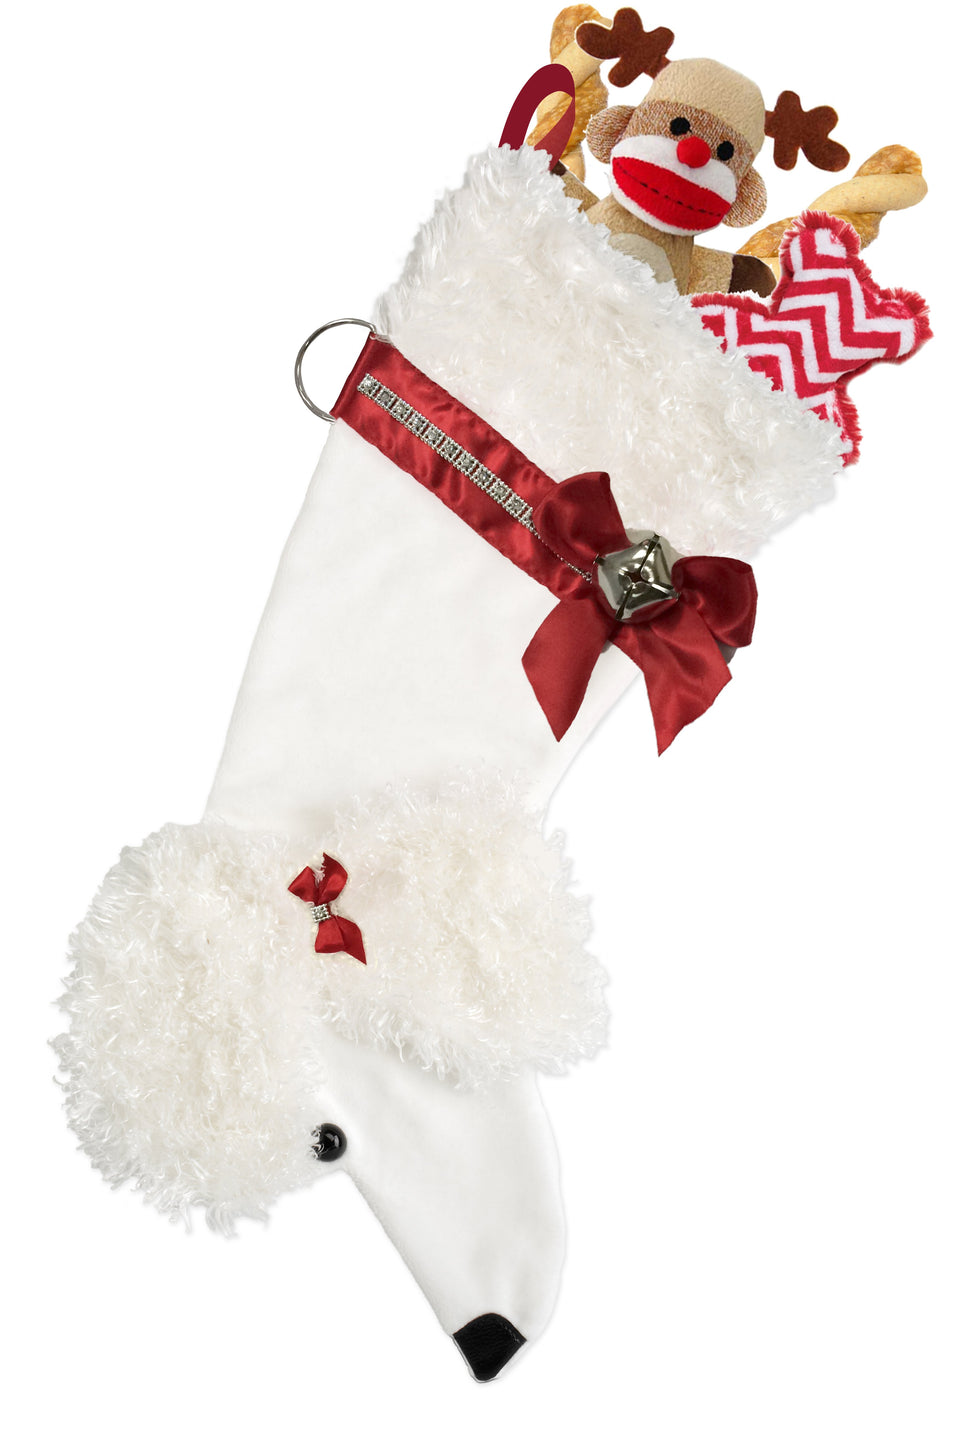 This White Poodle shaped dog Christmas stocking is the perfect gift for stuffing toys and treats into to spoil your fur baby for Christmas, or whatever holiday you celebrate!